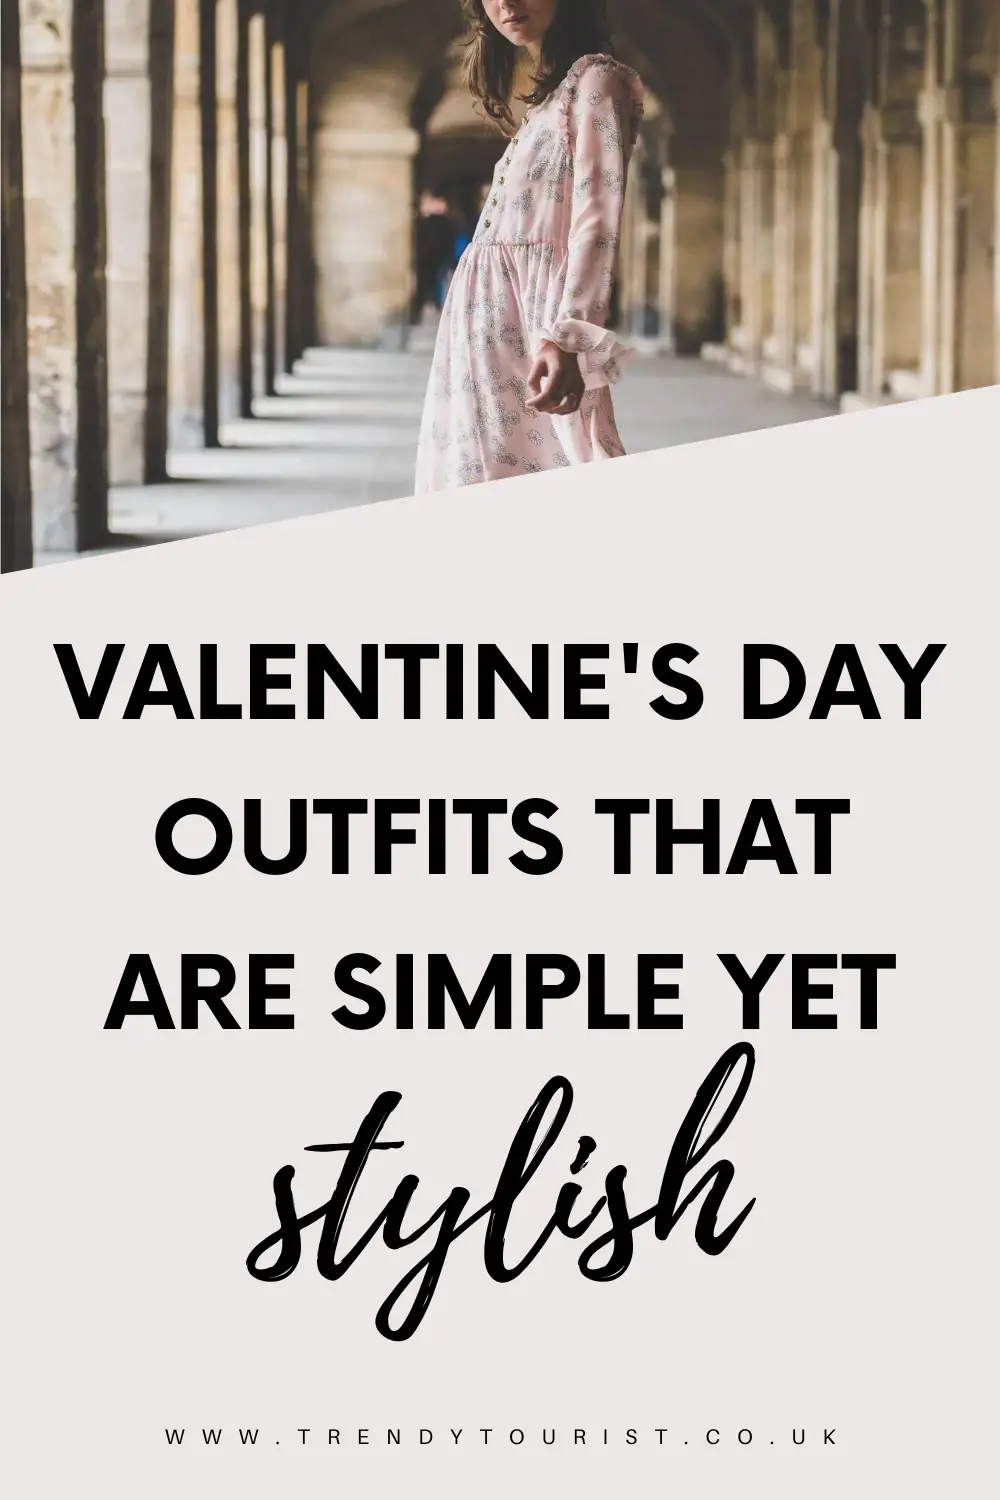 Valentine's Day Outfits That Are Simple Yet Stylish